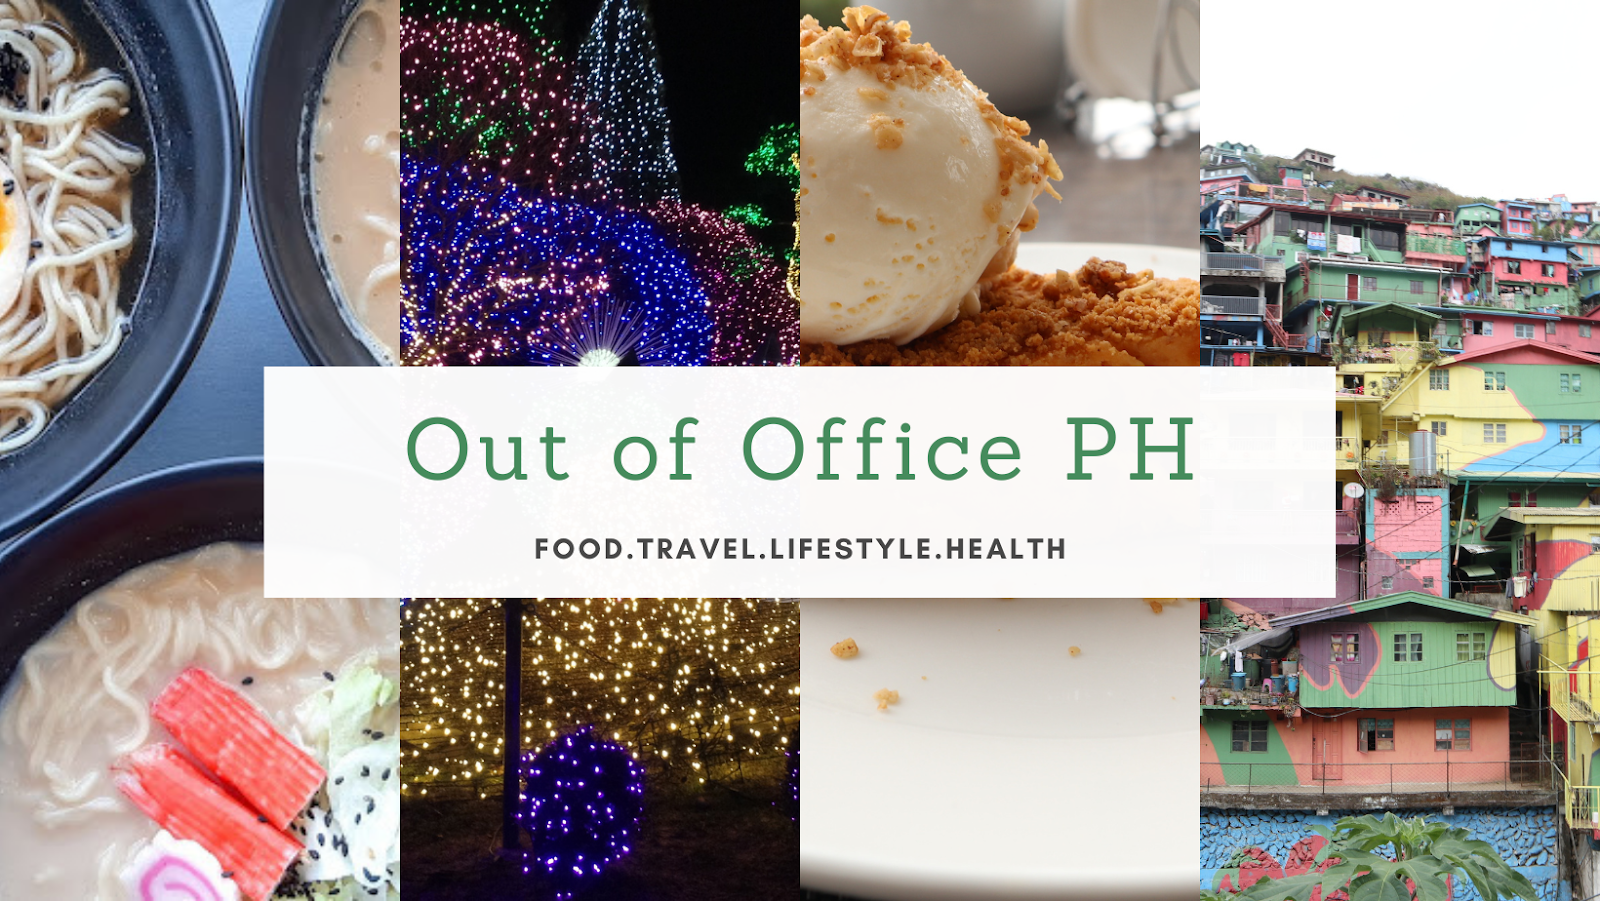 Out of Office PH